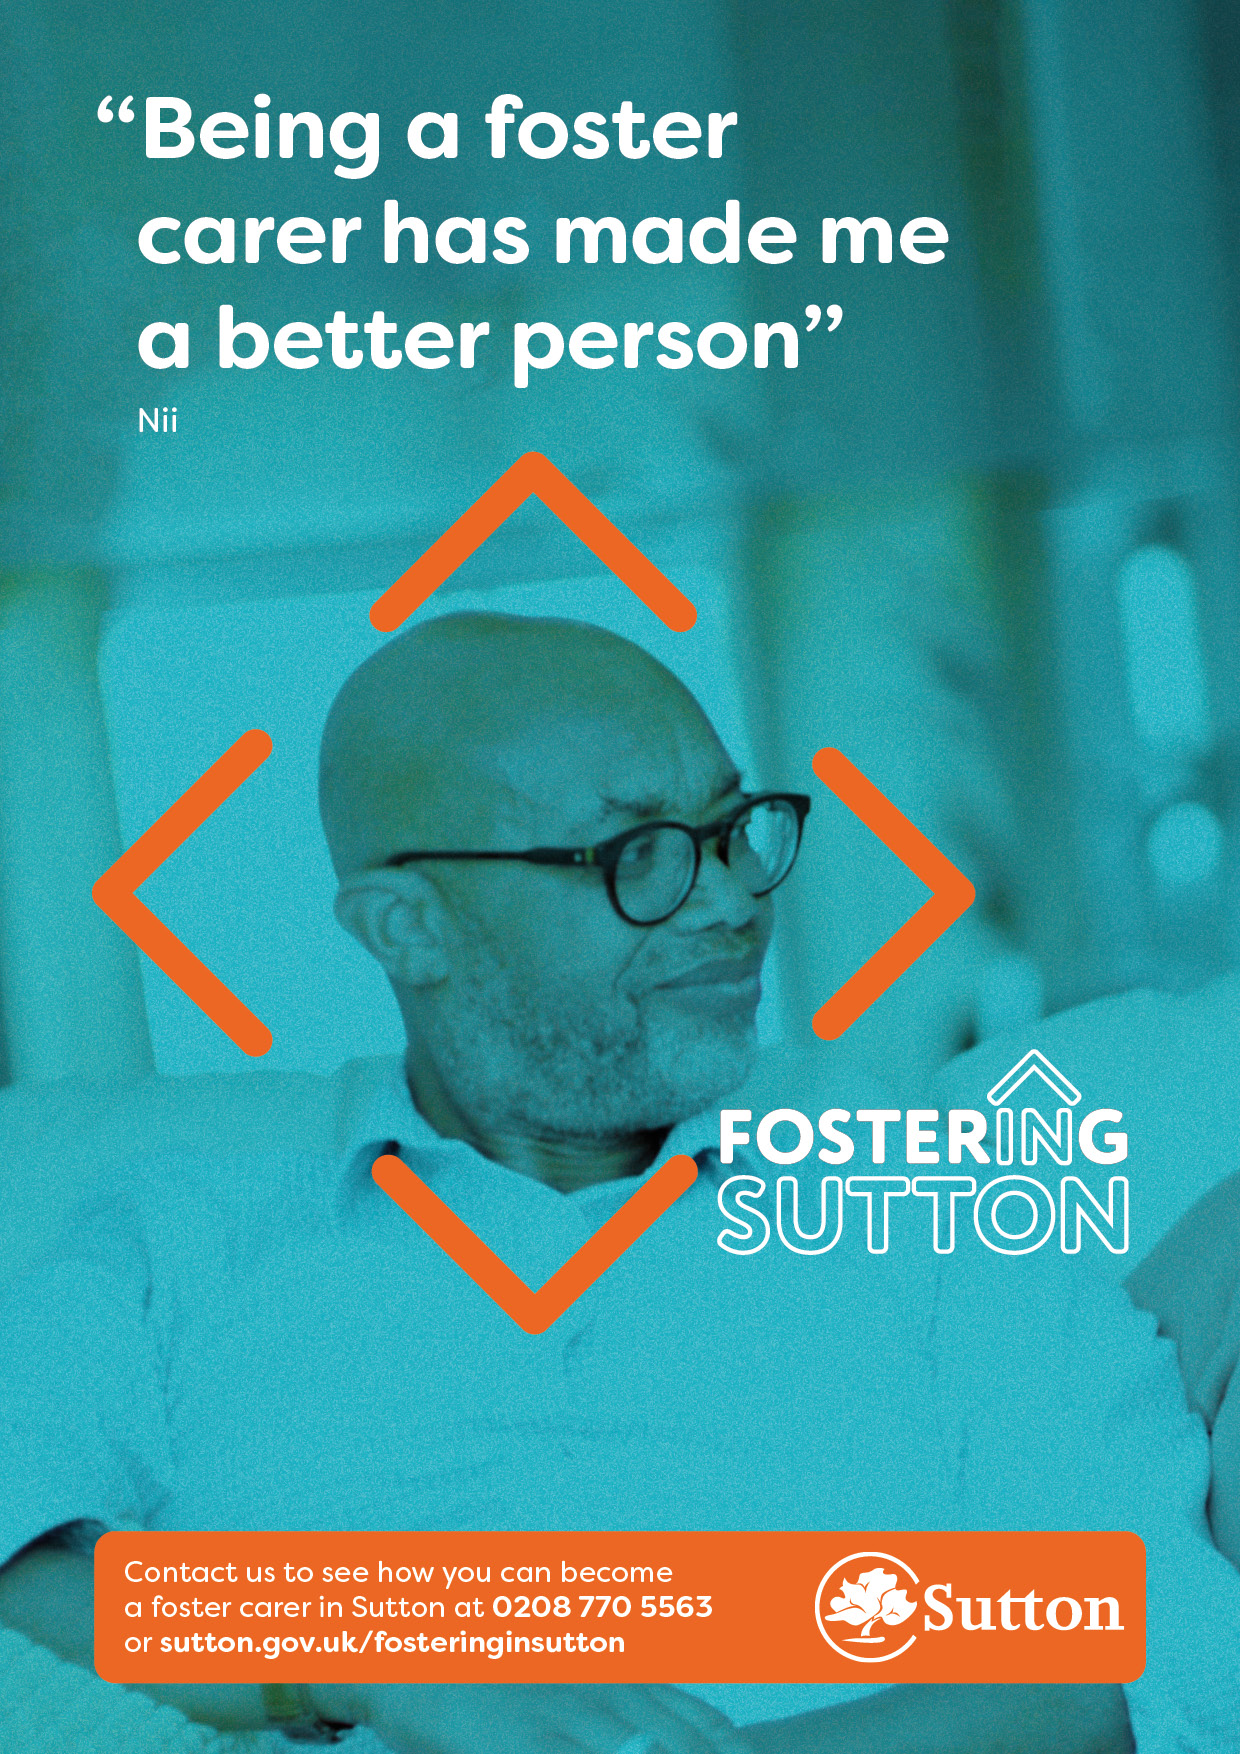 32_27 - SUT_Sutton Foster Carers Recruitment Campaign Phase 2_A4_Poster_quote_AW2